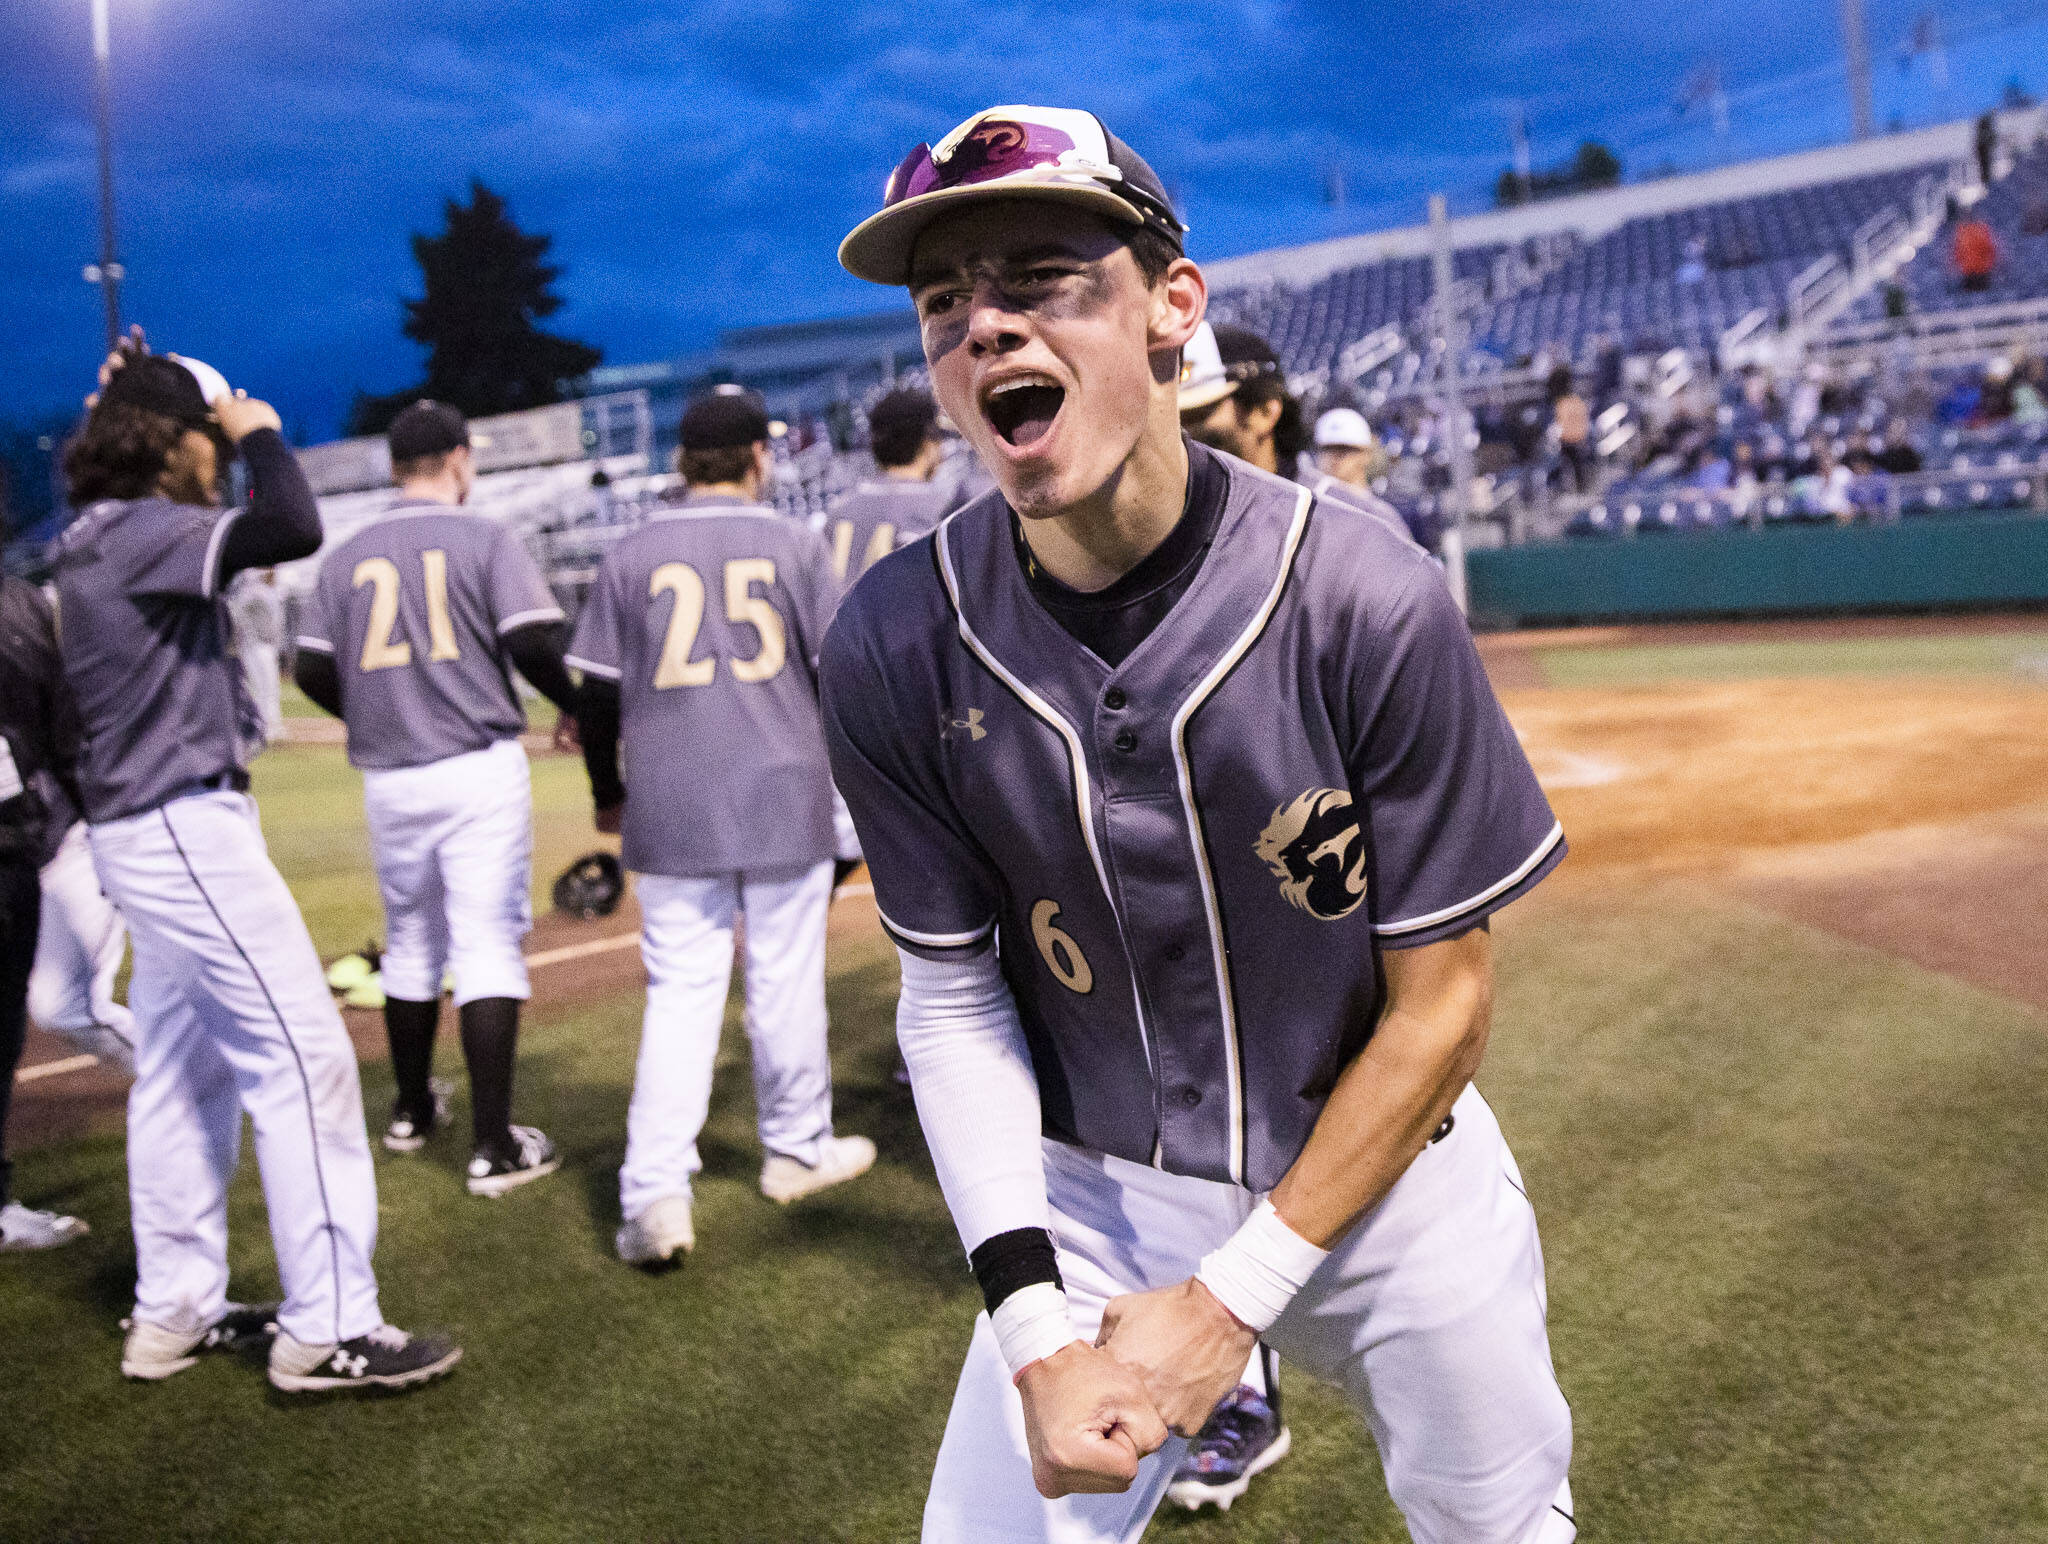 Jace Hampson and Lynnwood are among the four local baseball teams that advanced to Saturday’s state regionals. (Olivia Vanni / The Herald)